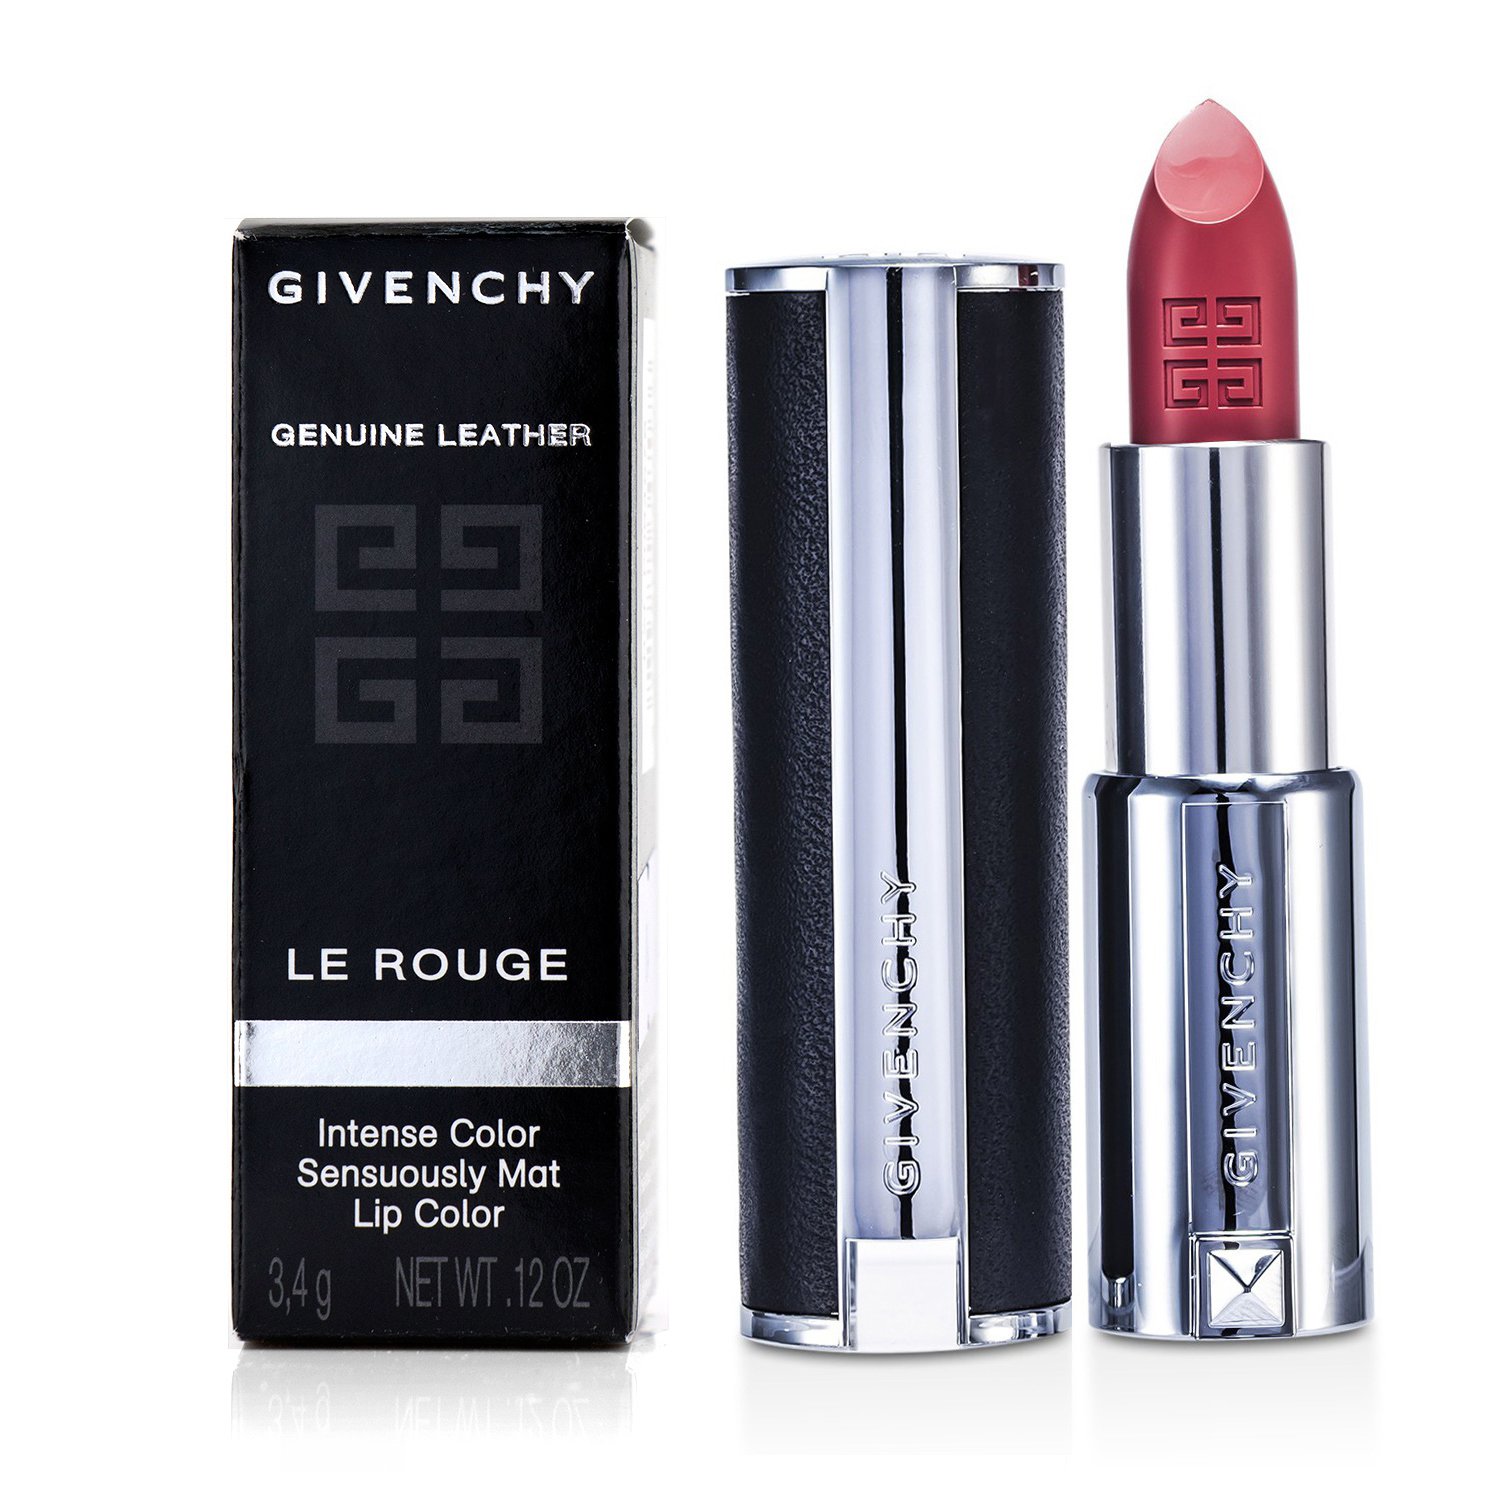 Губная помада givenchy. Givenchy le rouge 110. Помада Givenchy le rouge. Givenchy le rouge mat 216. Губная помада Givenchy le rouge mat 216.